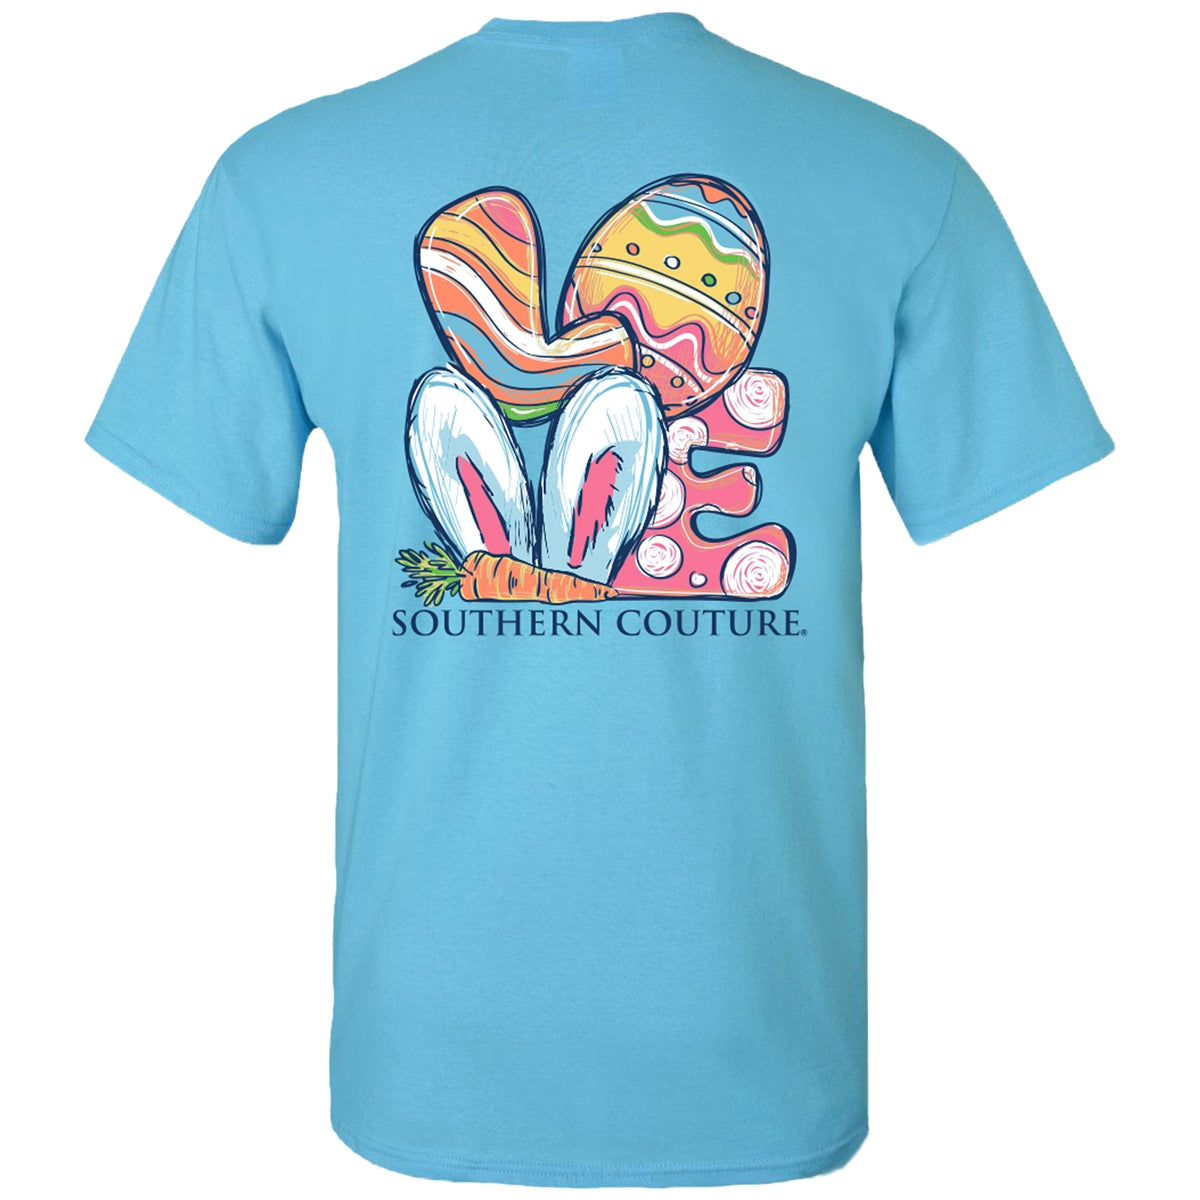 Southern Couture - SimplyCuteTees